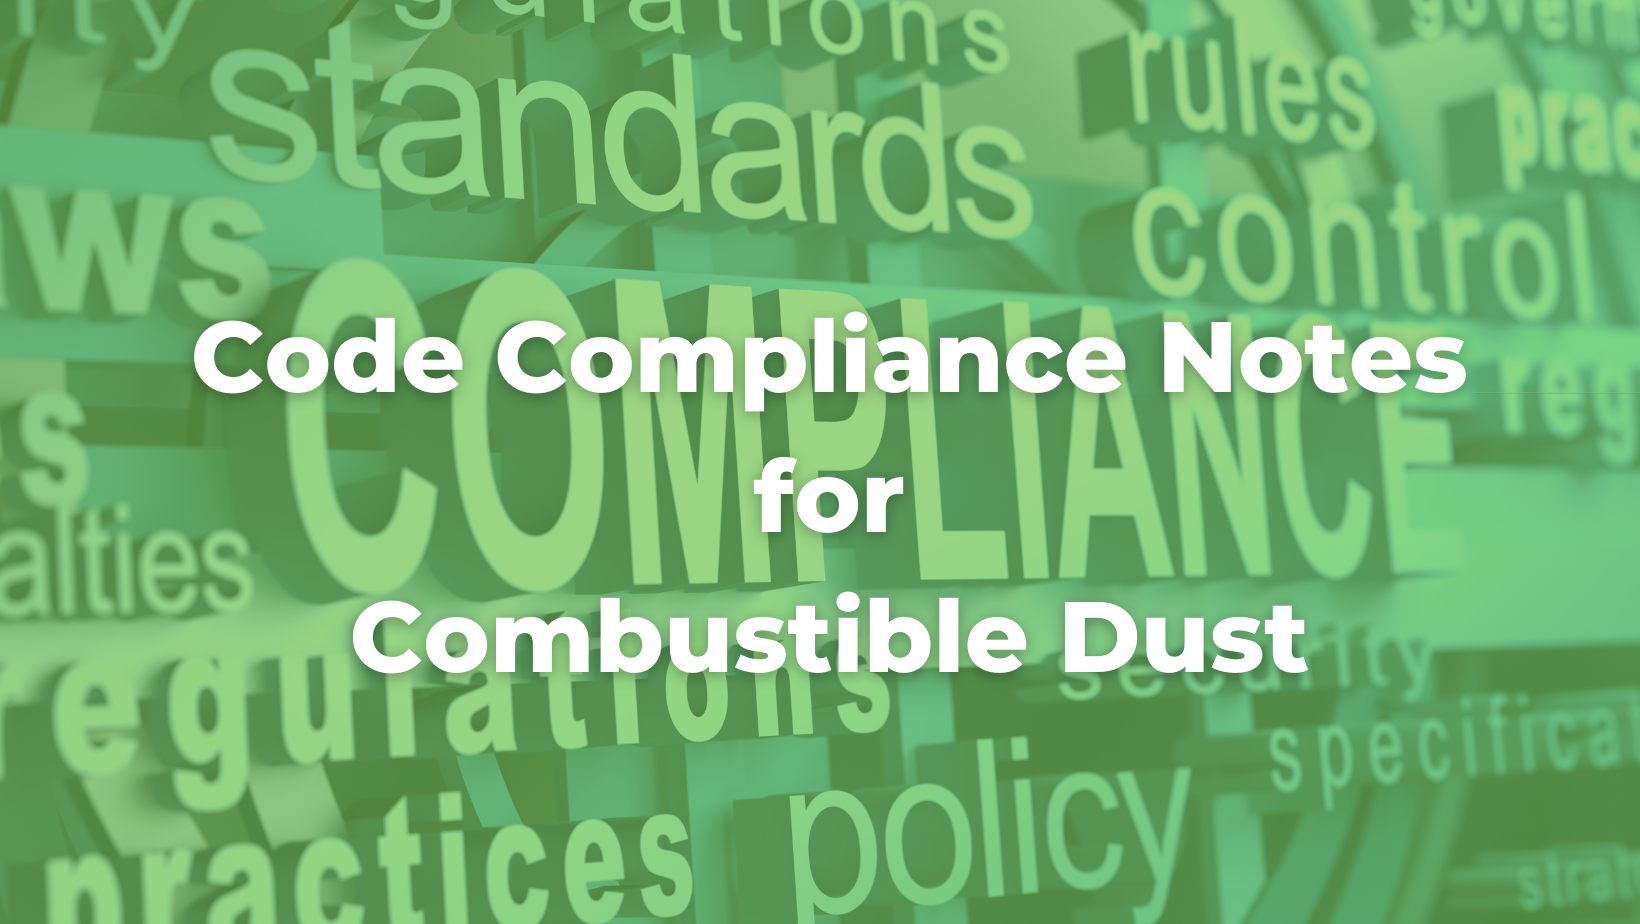 Code Compliance Combustible Dust